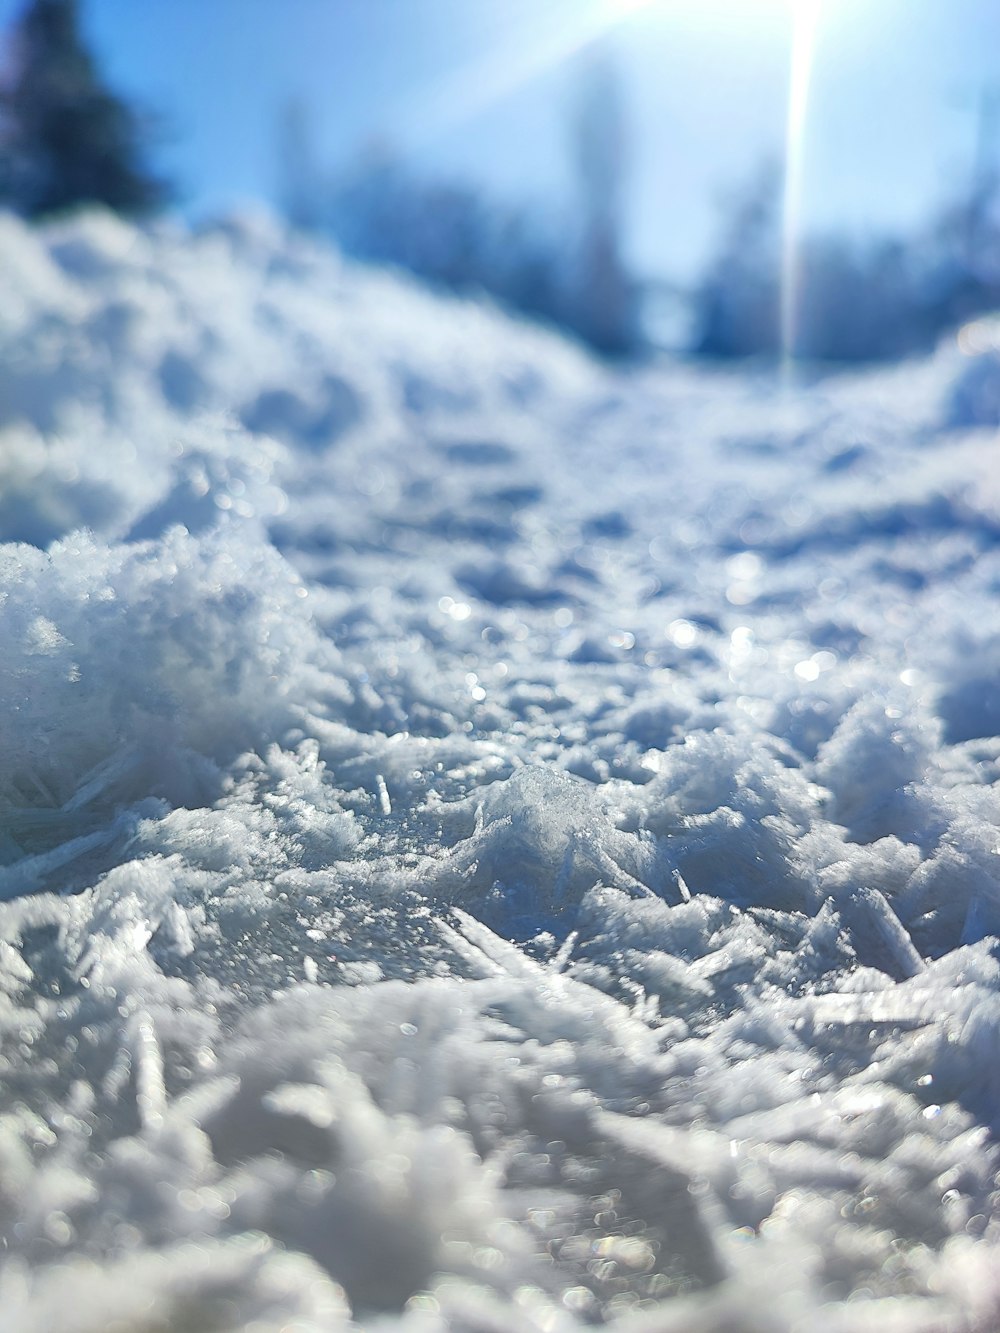 a close up of a snow covered ground with trees in the background